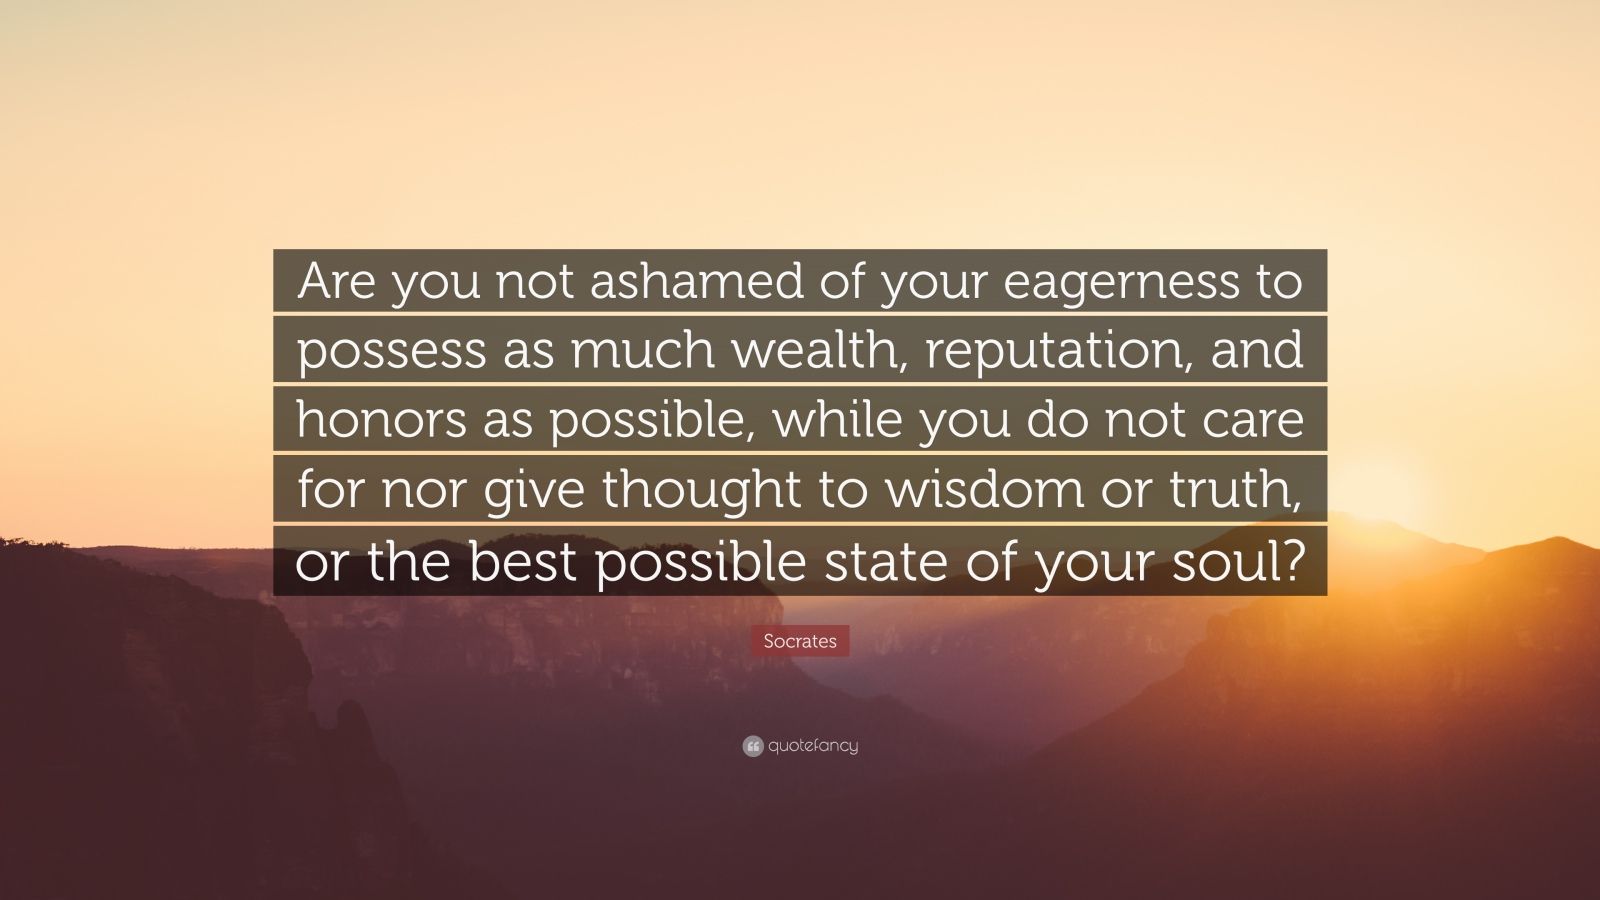 Socrates Quote “Are you not ashamed of your eagerness to possess as much wealth